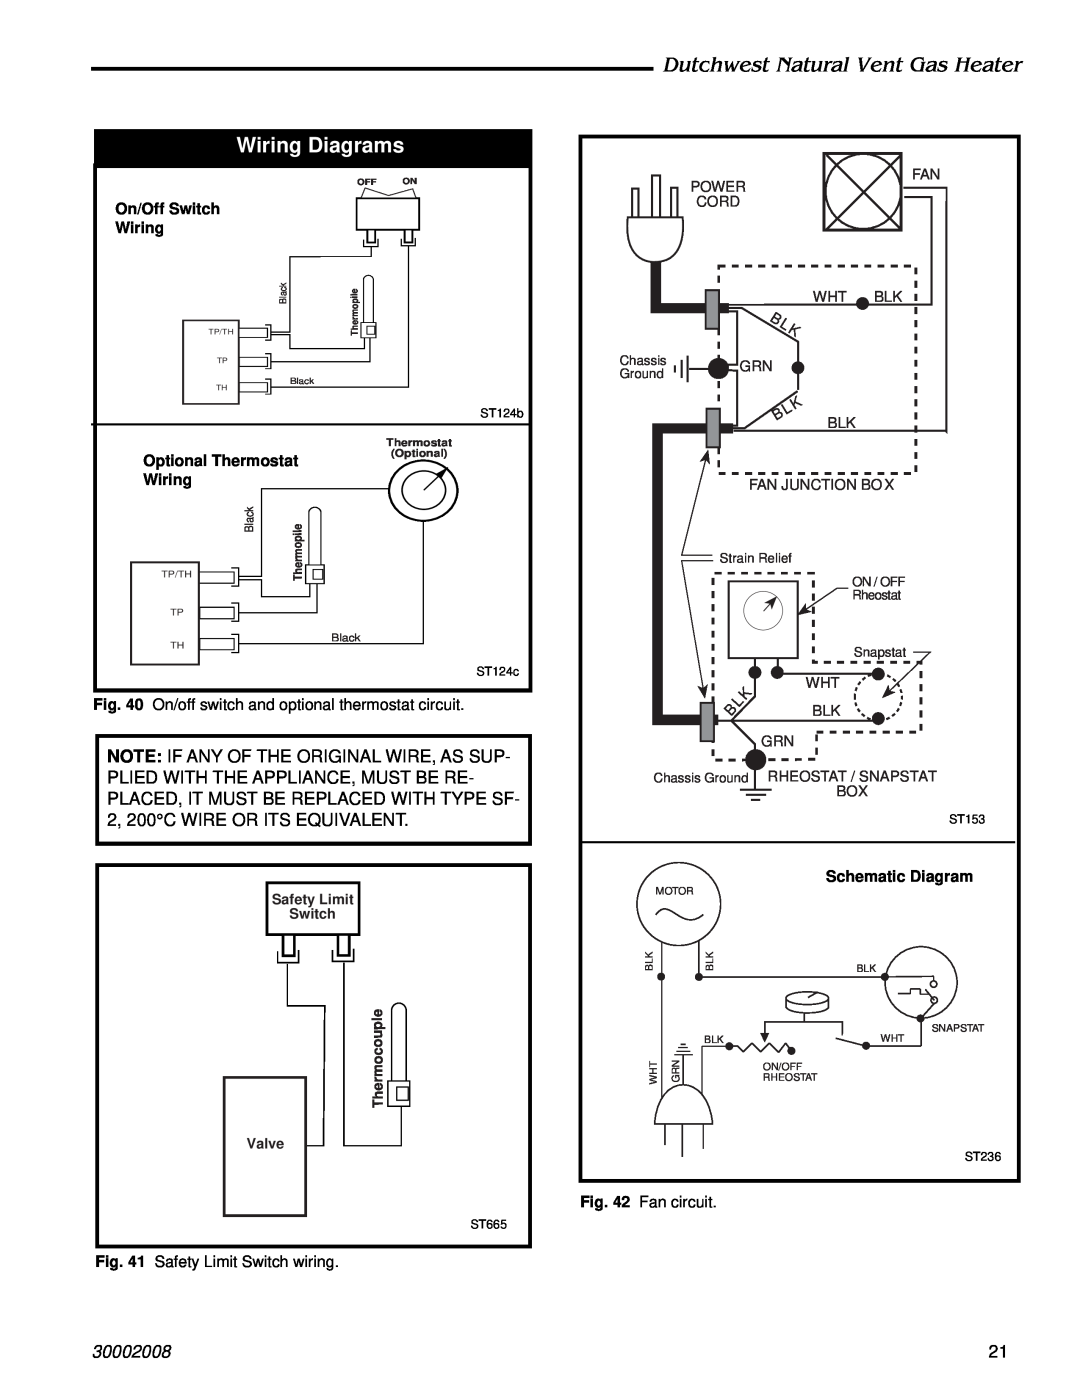 CFM Corporation 2467, 2468 Wiring Diagrams, Dutchwest Natural Vent Gas Heater, 30002008, Schematic Diagram, Thermocouple 